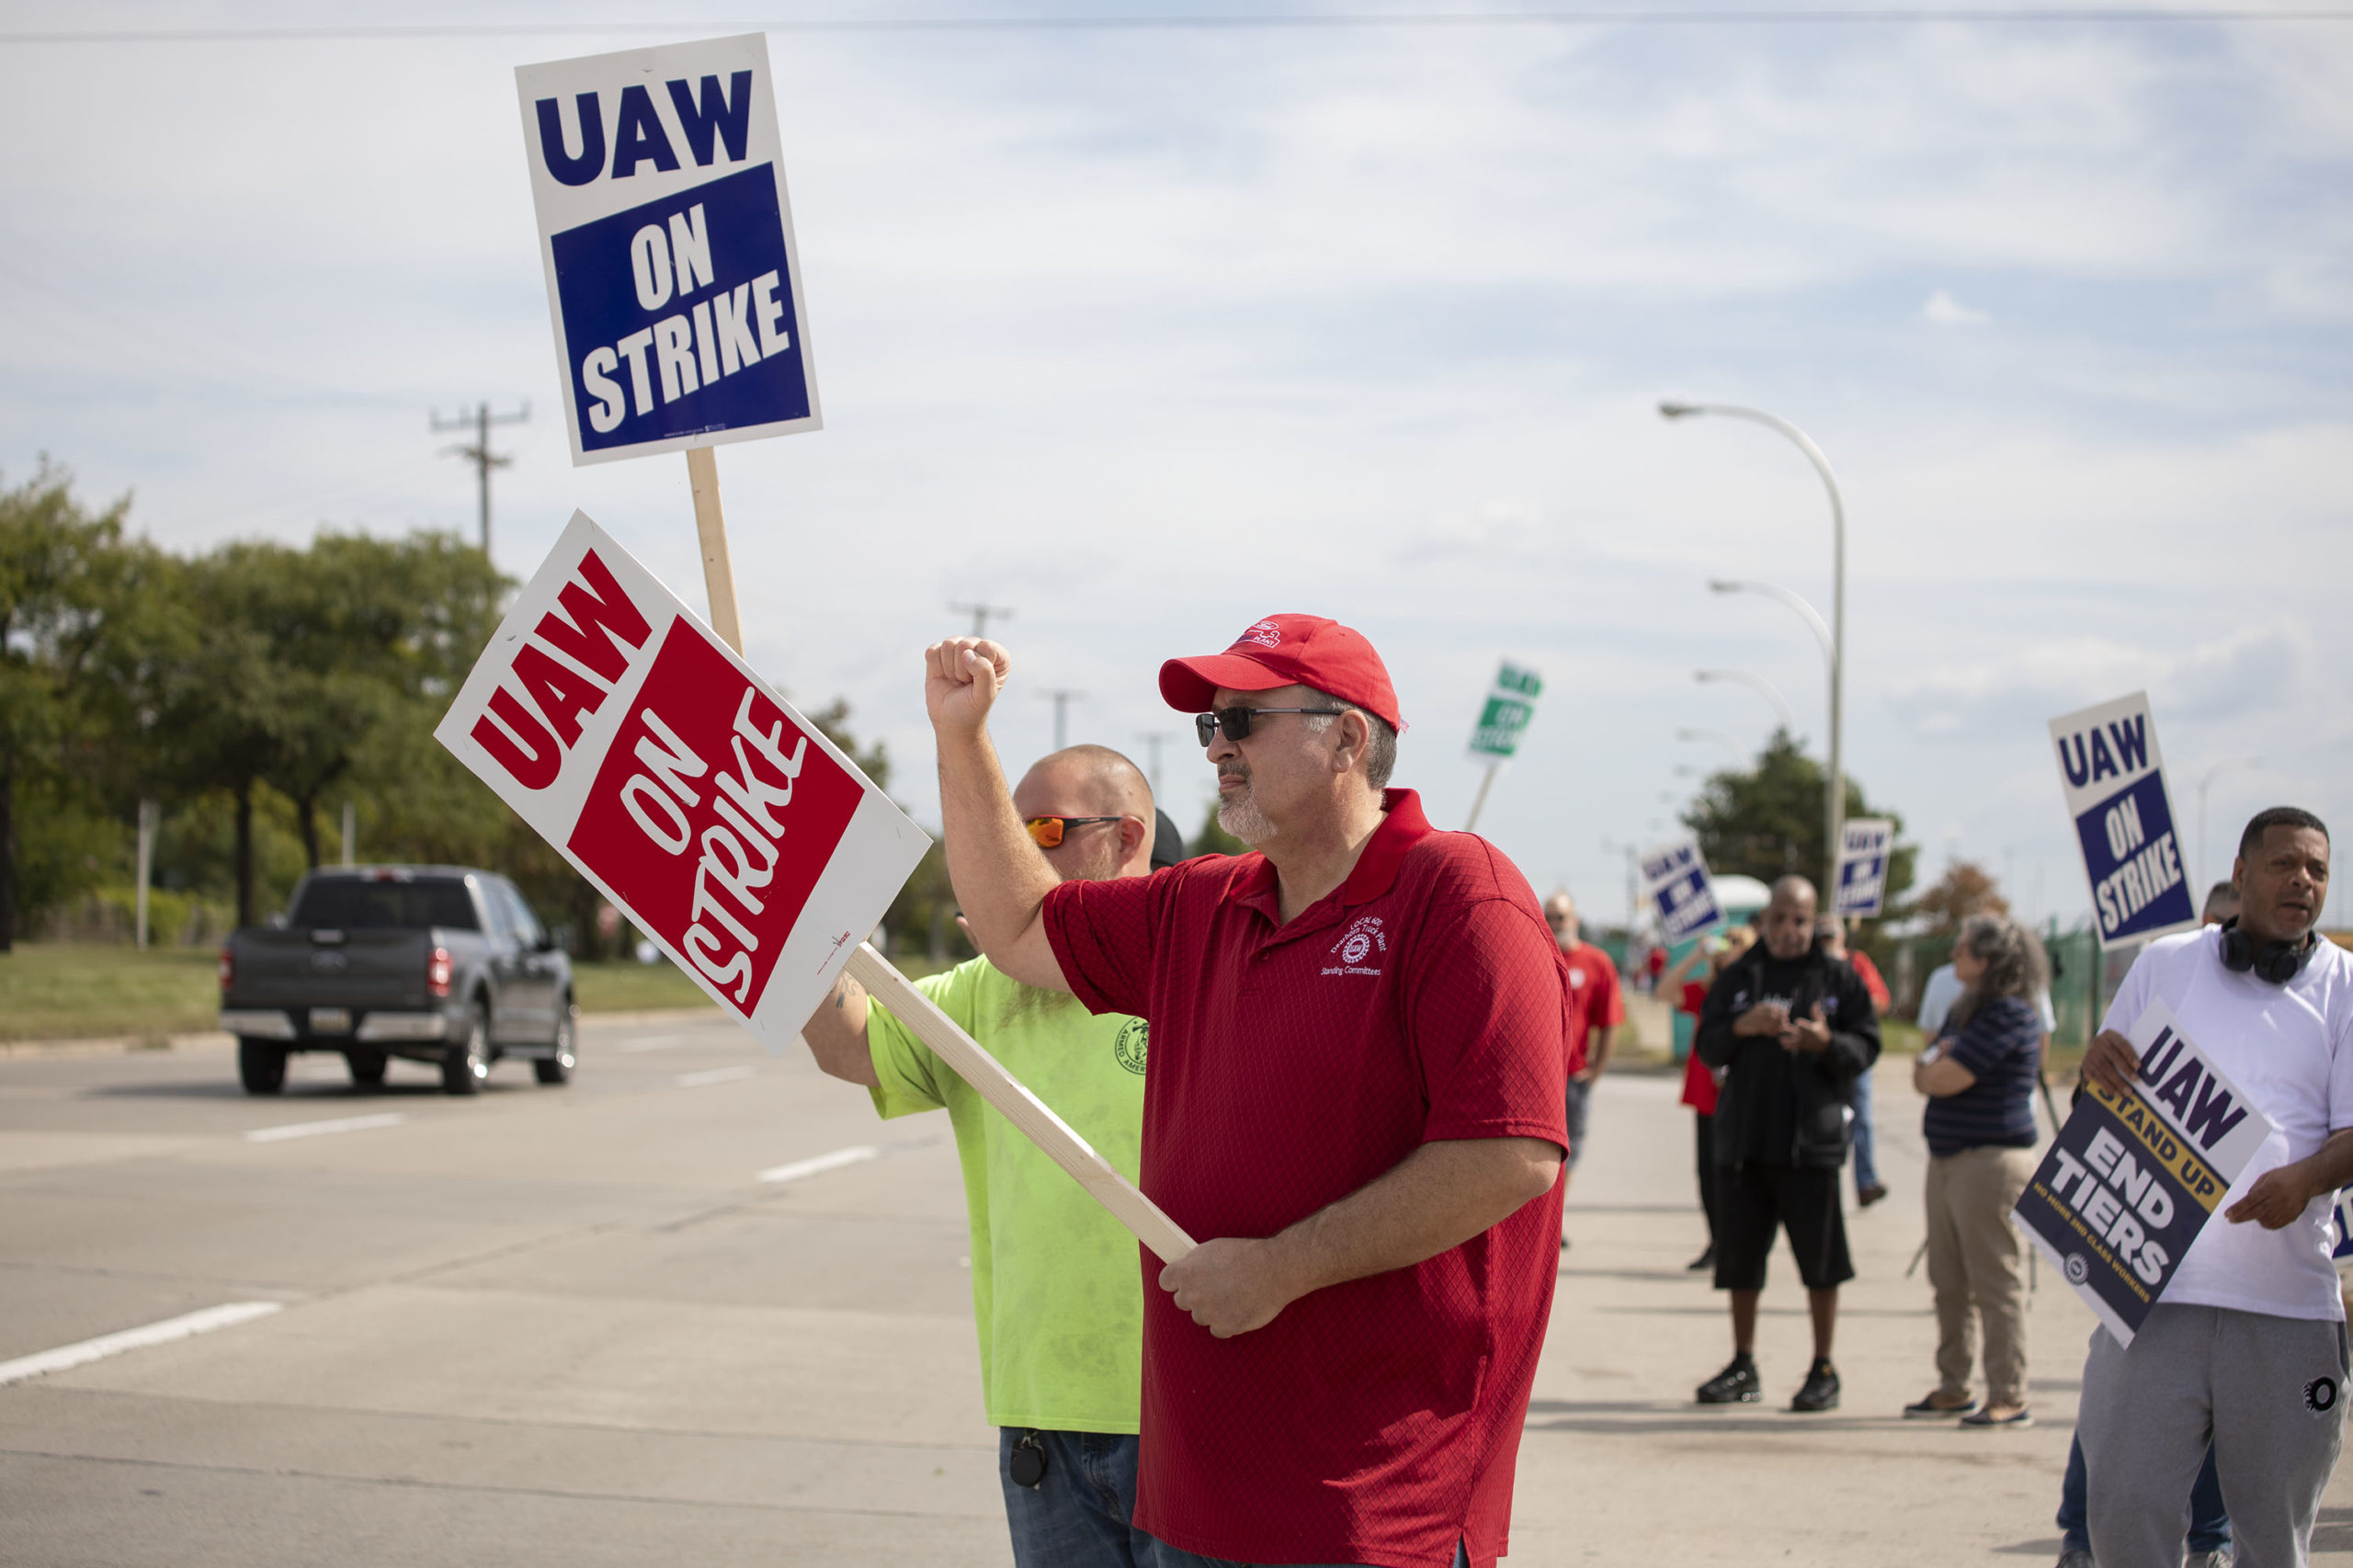 Members of the United Auto Workers strike at a Ford Michigan assembly plant on September 16, 2023 in Wayne, Michigan.  This is the first time in history that the UAW has struck the Big Three automakers, Ford, General Motors, and Stellantis, at the same time.  (Photo by Bill Poliano/Getty Images)